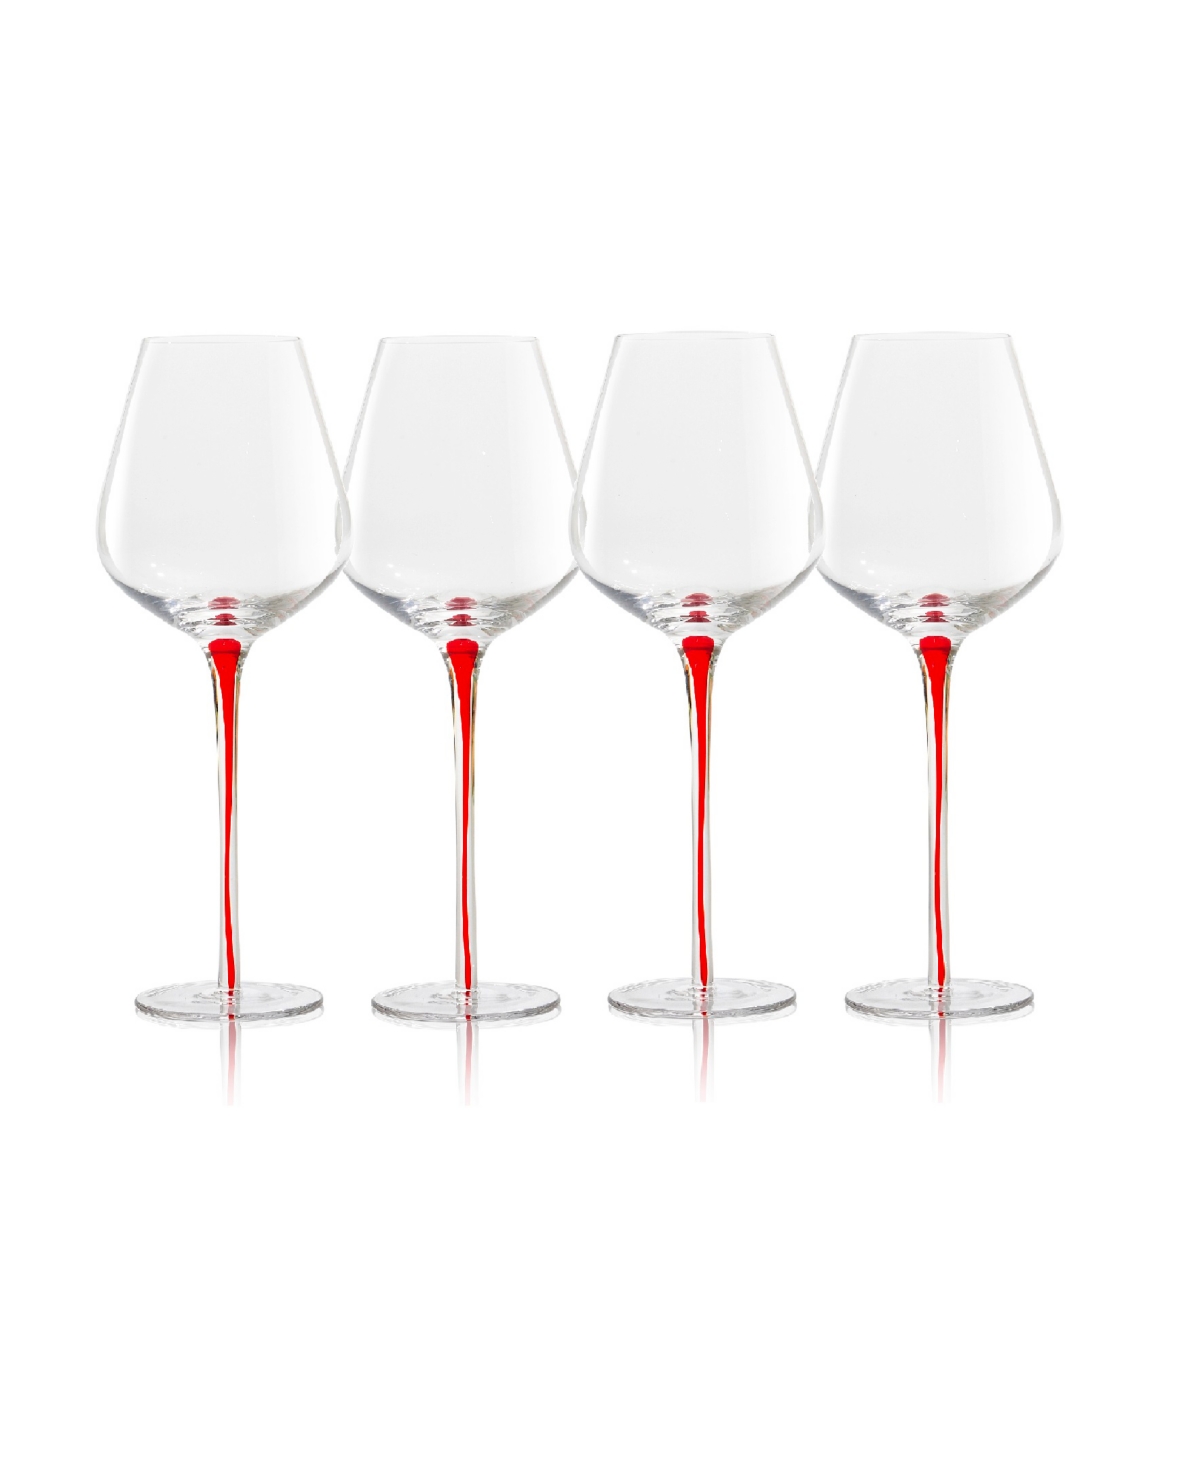 Qualia Glass Tempest Goblets, Set Of 4 In Clear,red